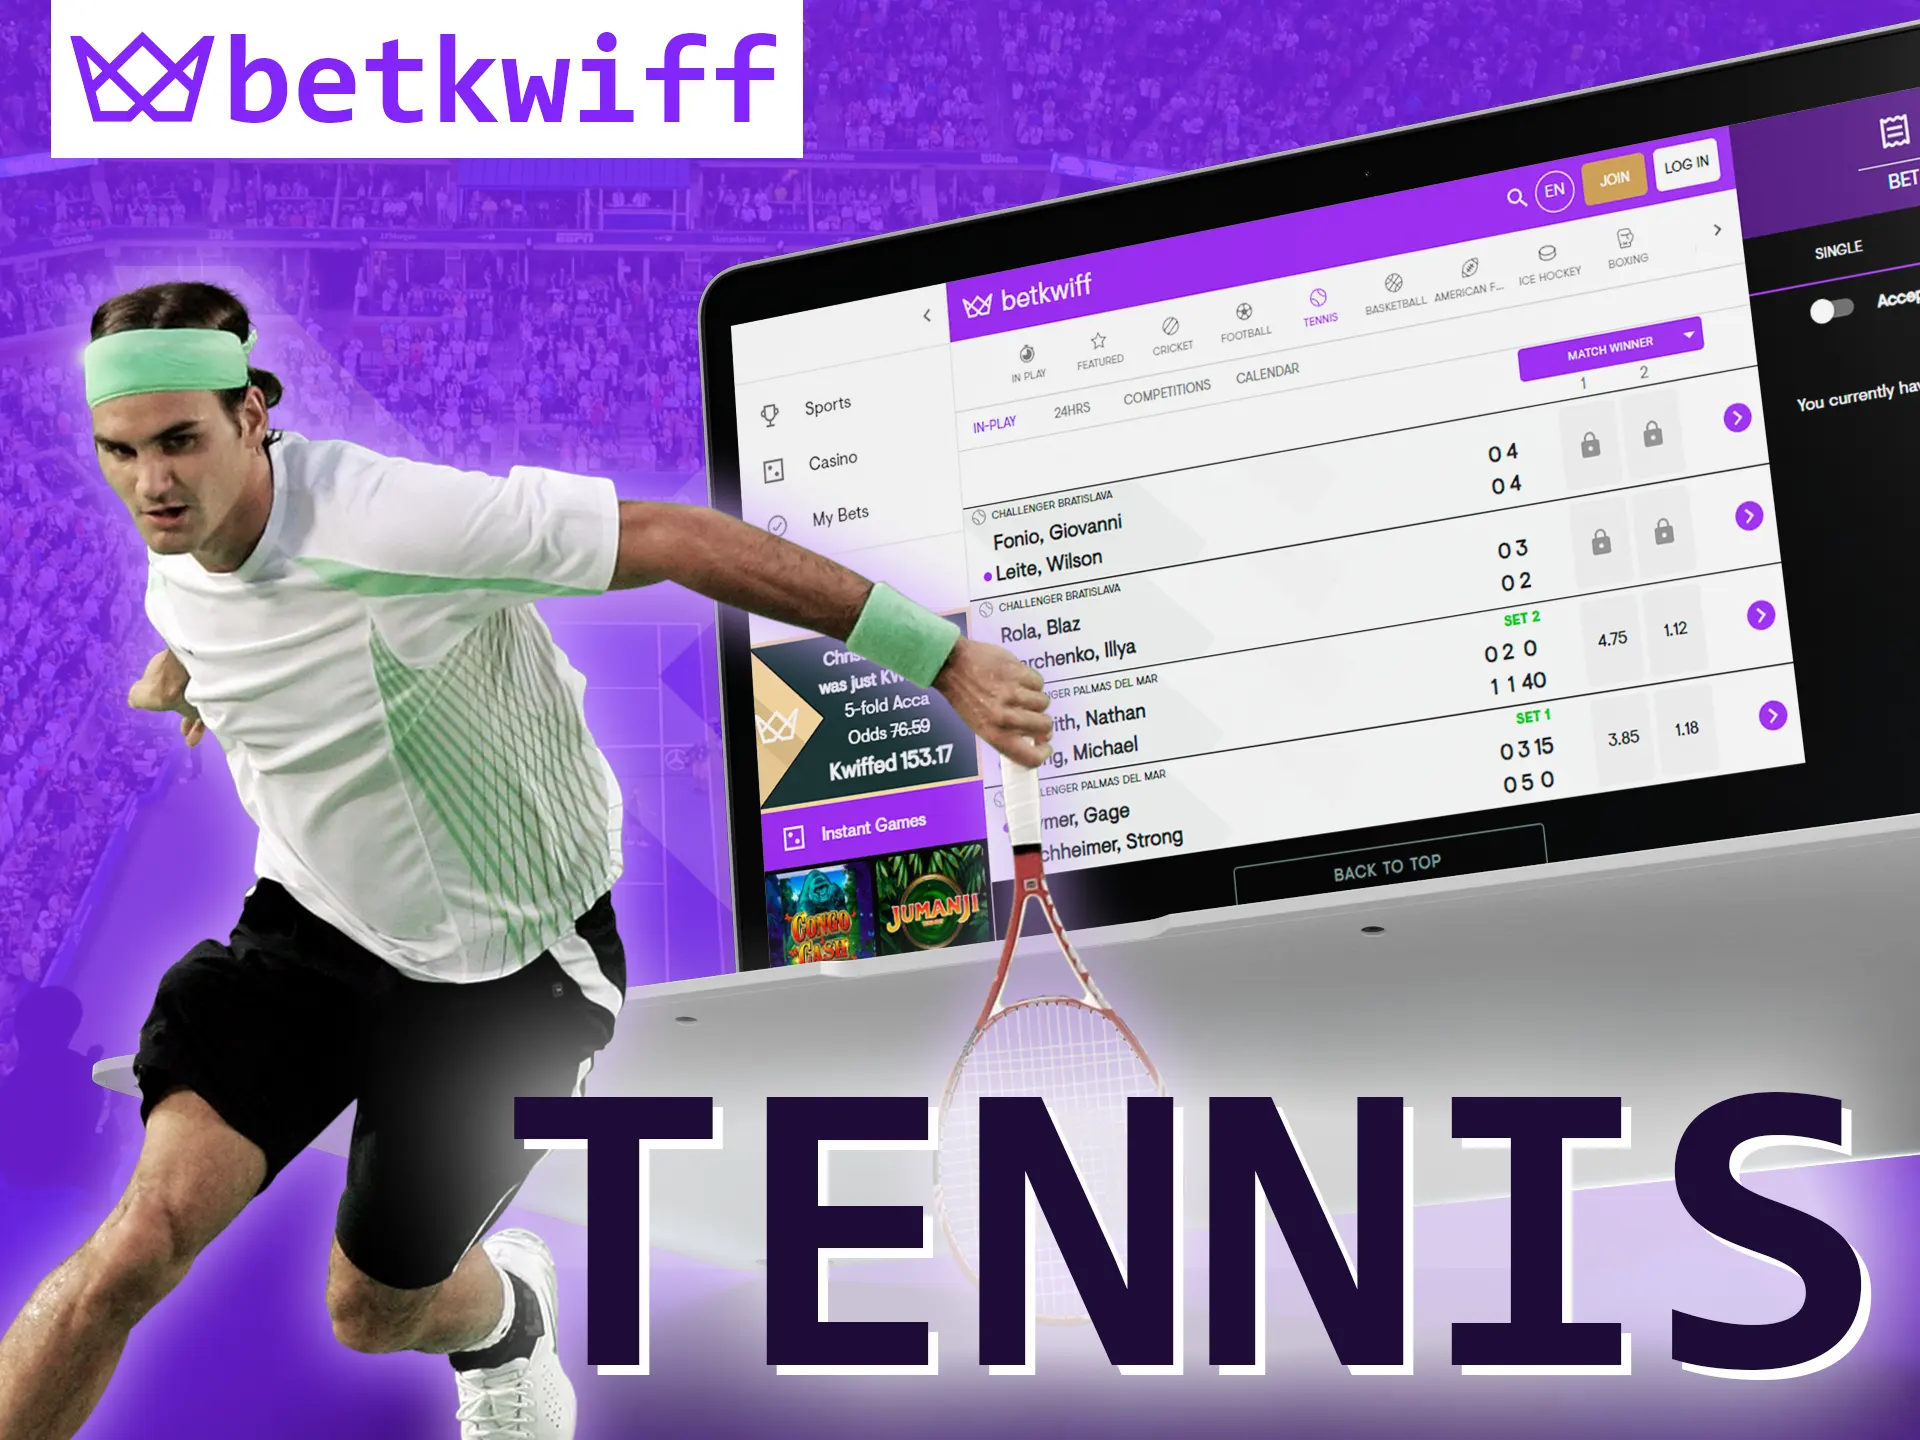 Bet on tennis with Betkwiff.